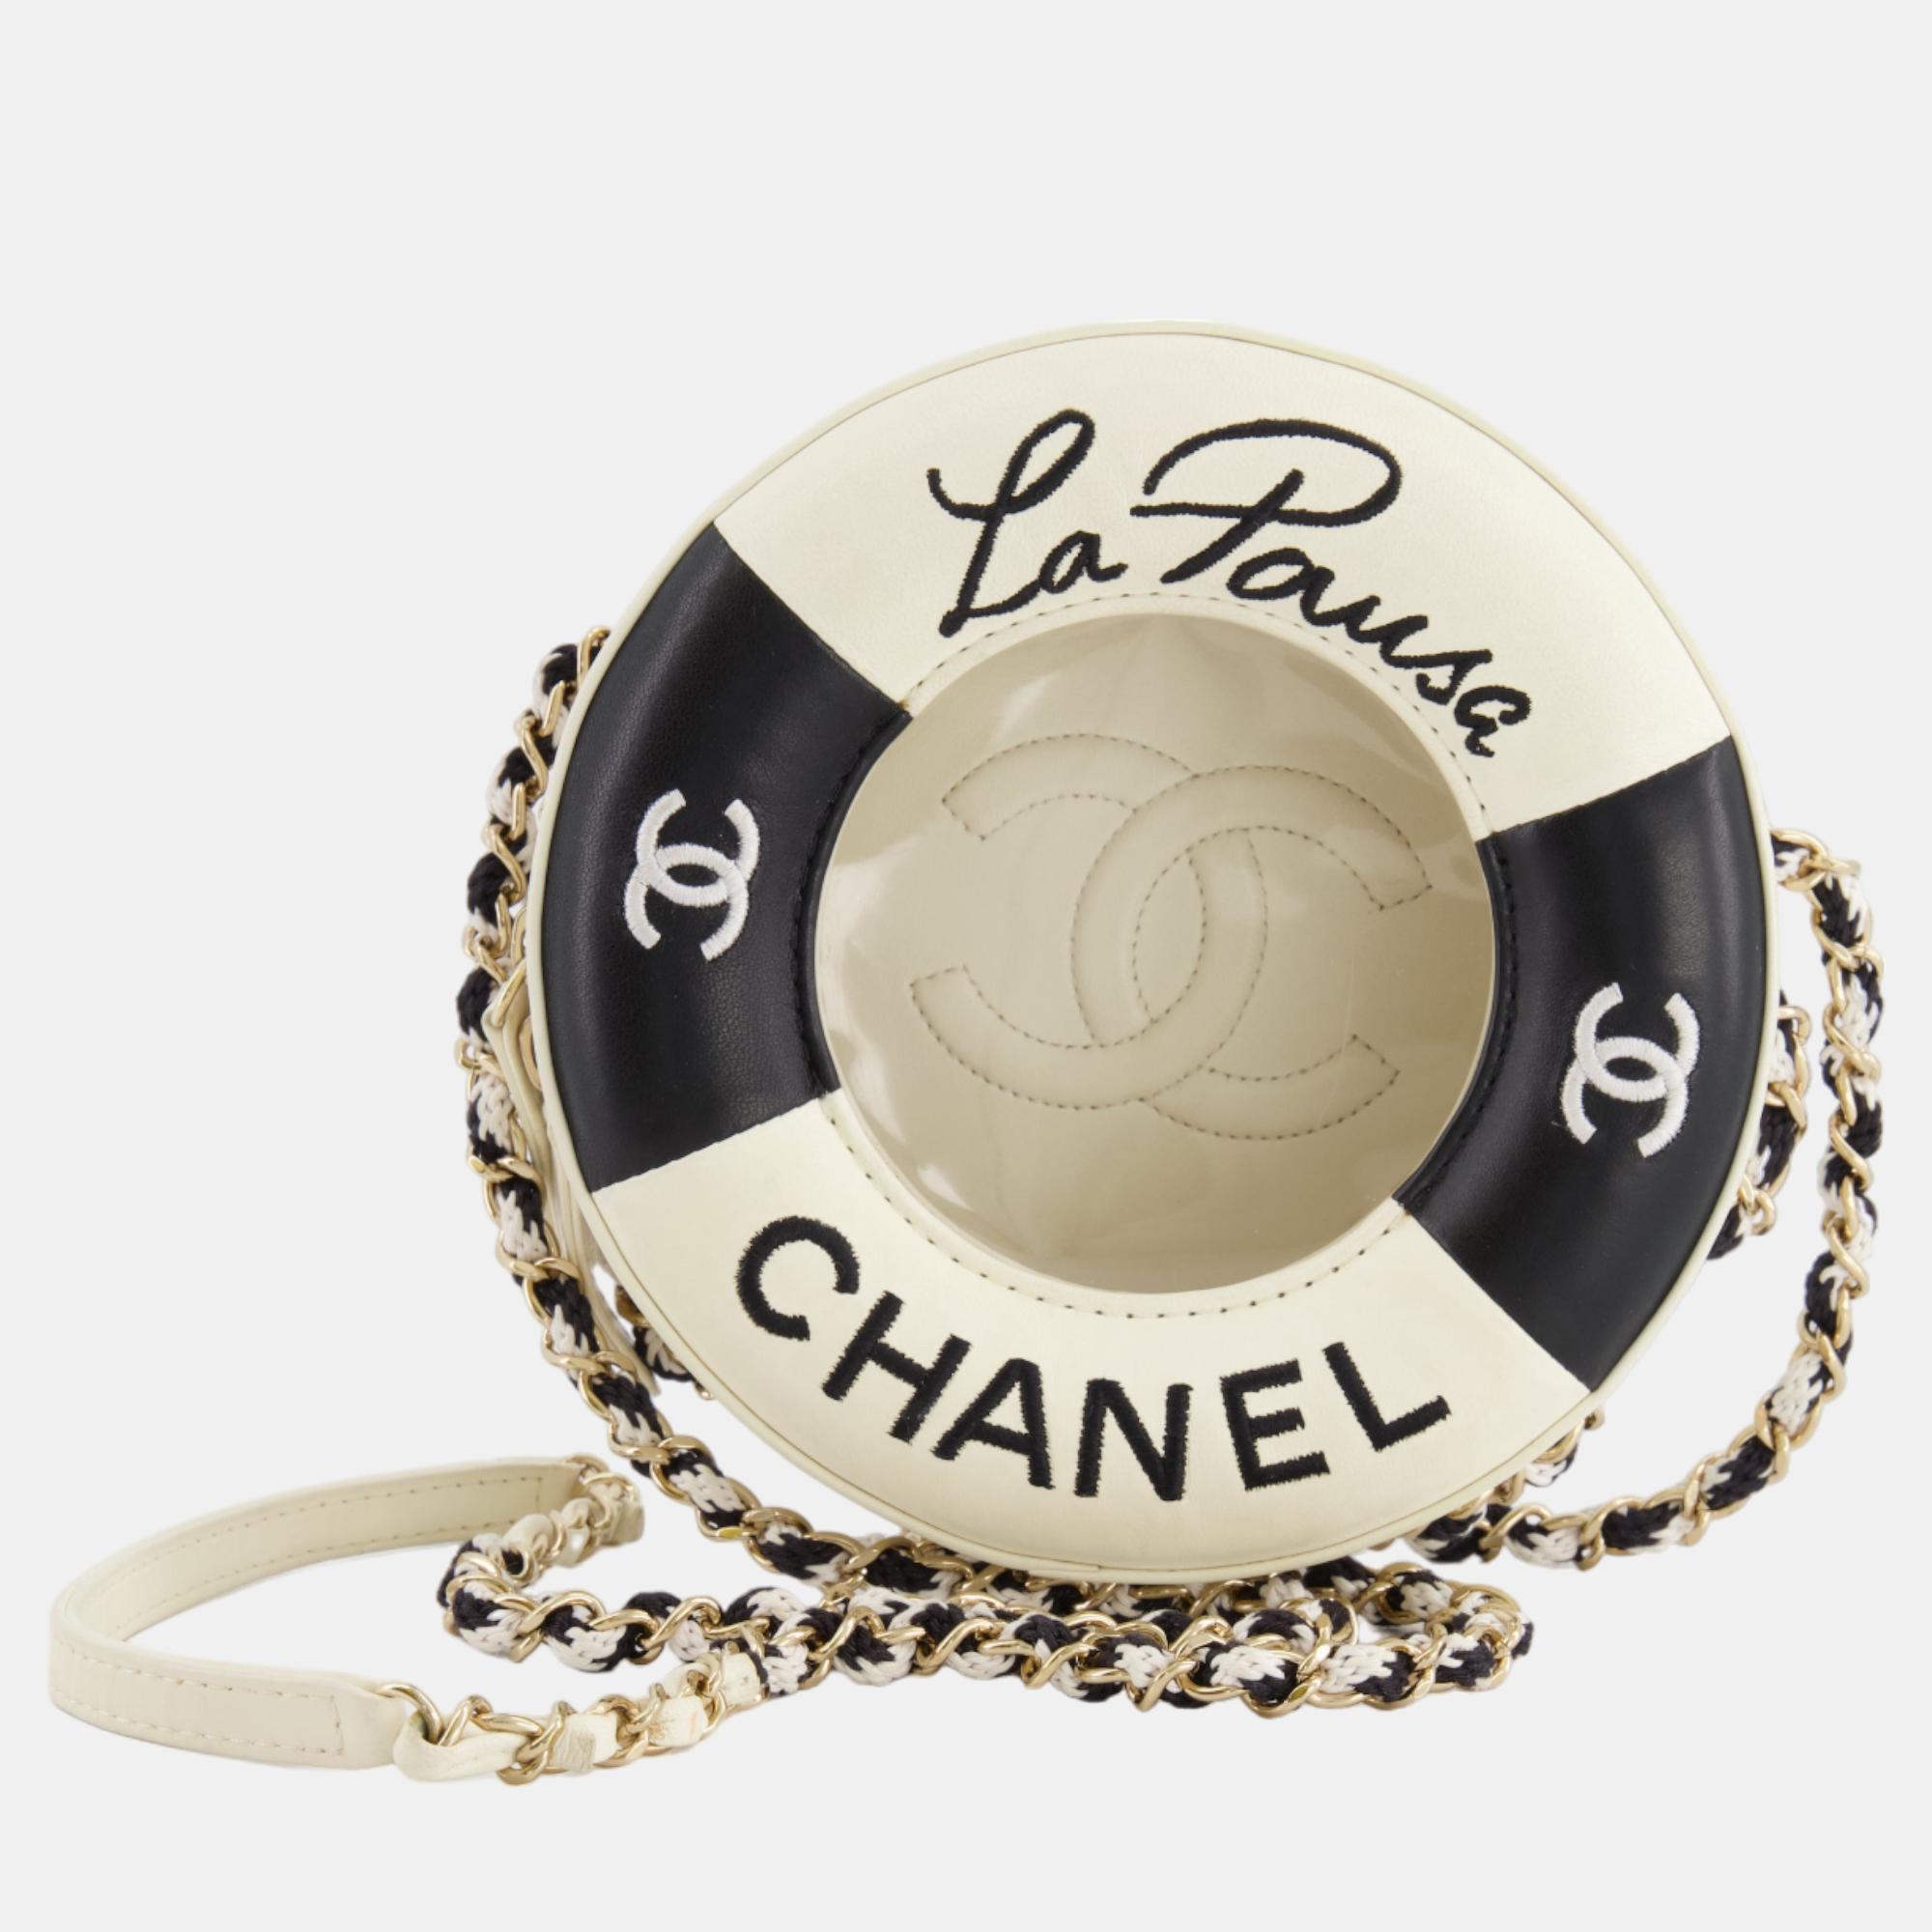 Chanel La Pausa Coco Lifesaver Bag In Black And White With Champagne Gold Hardware